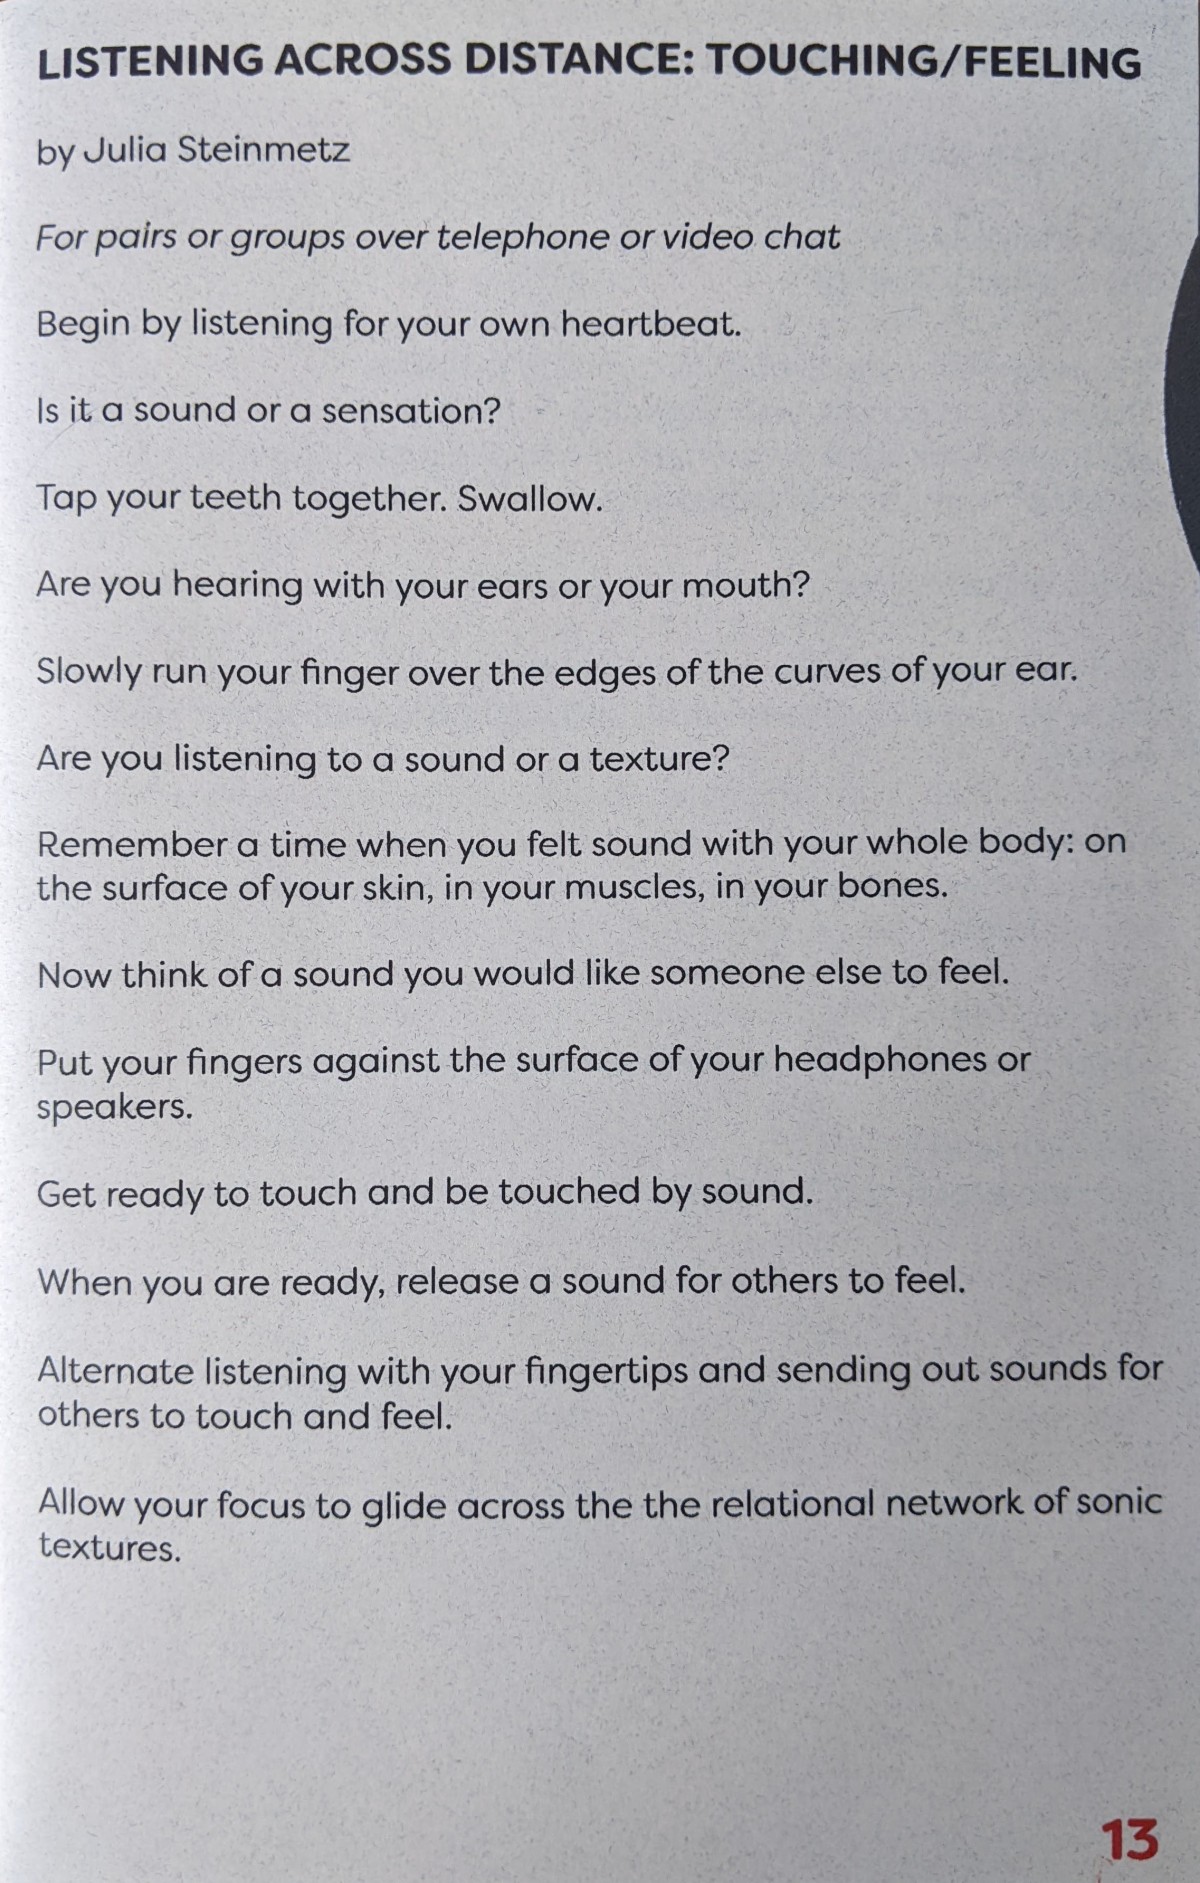 Page 13 from Sonic Meditations zine; see below for text